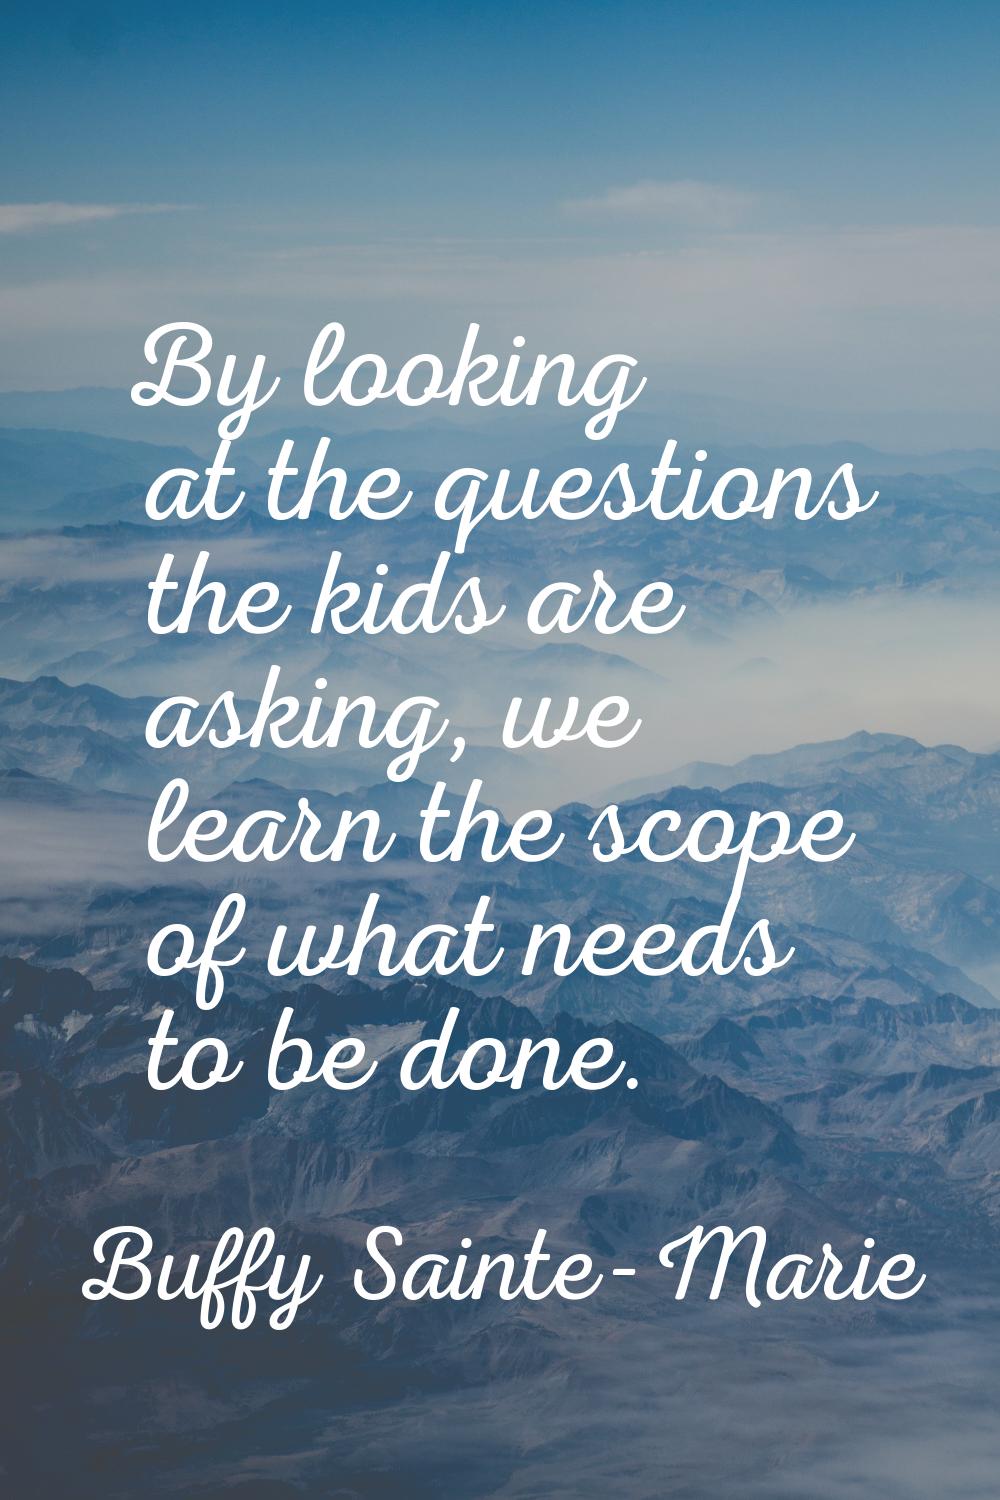 By looking at the questions the kids are asking, we learn the scope of what needs to be done.